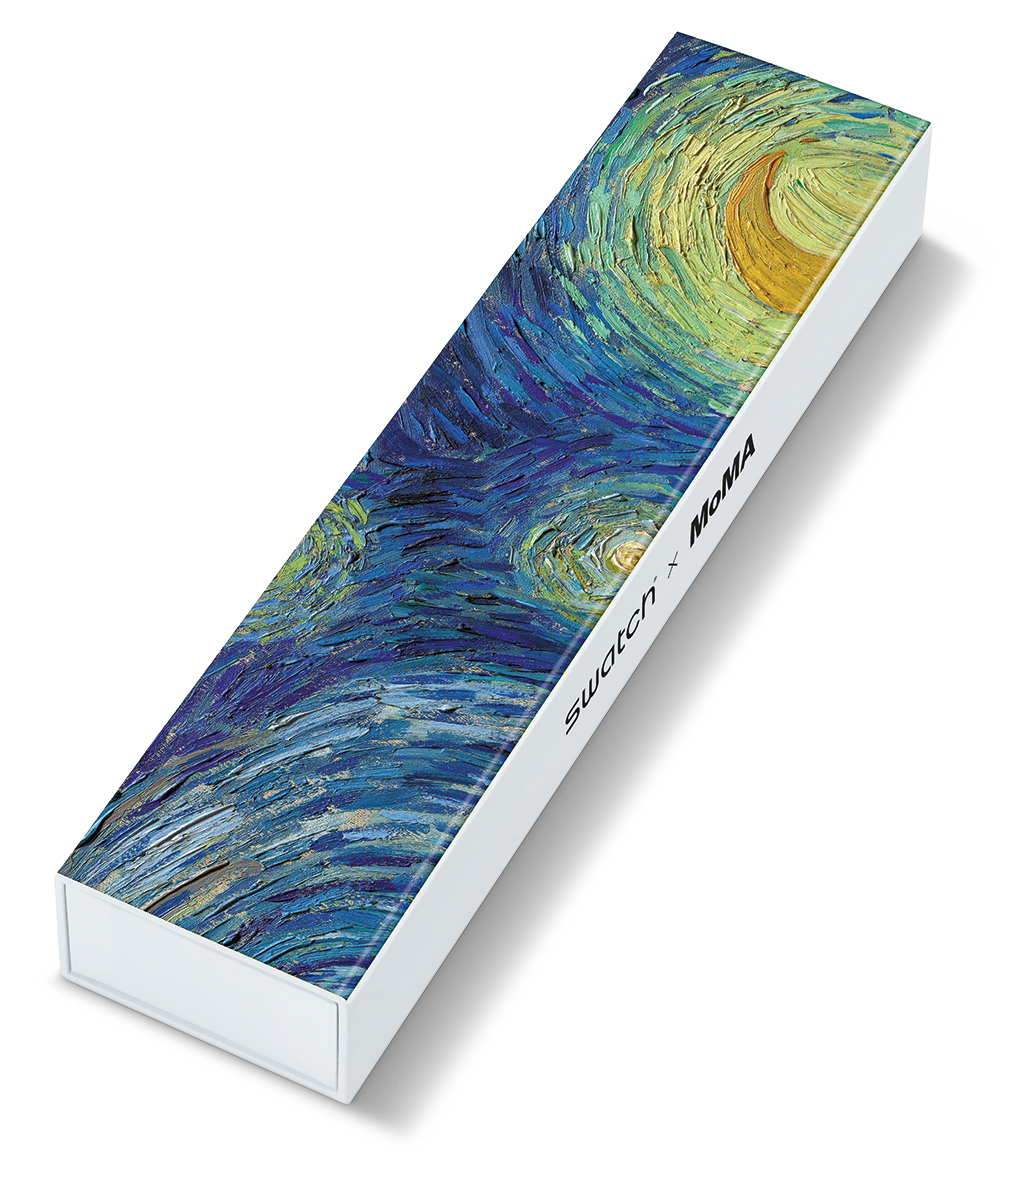 SWATCH THE STARRY NIGHT BY VINCENT VAN GOGH lifestyle